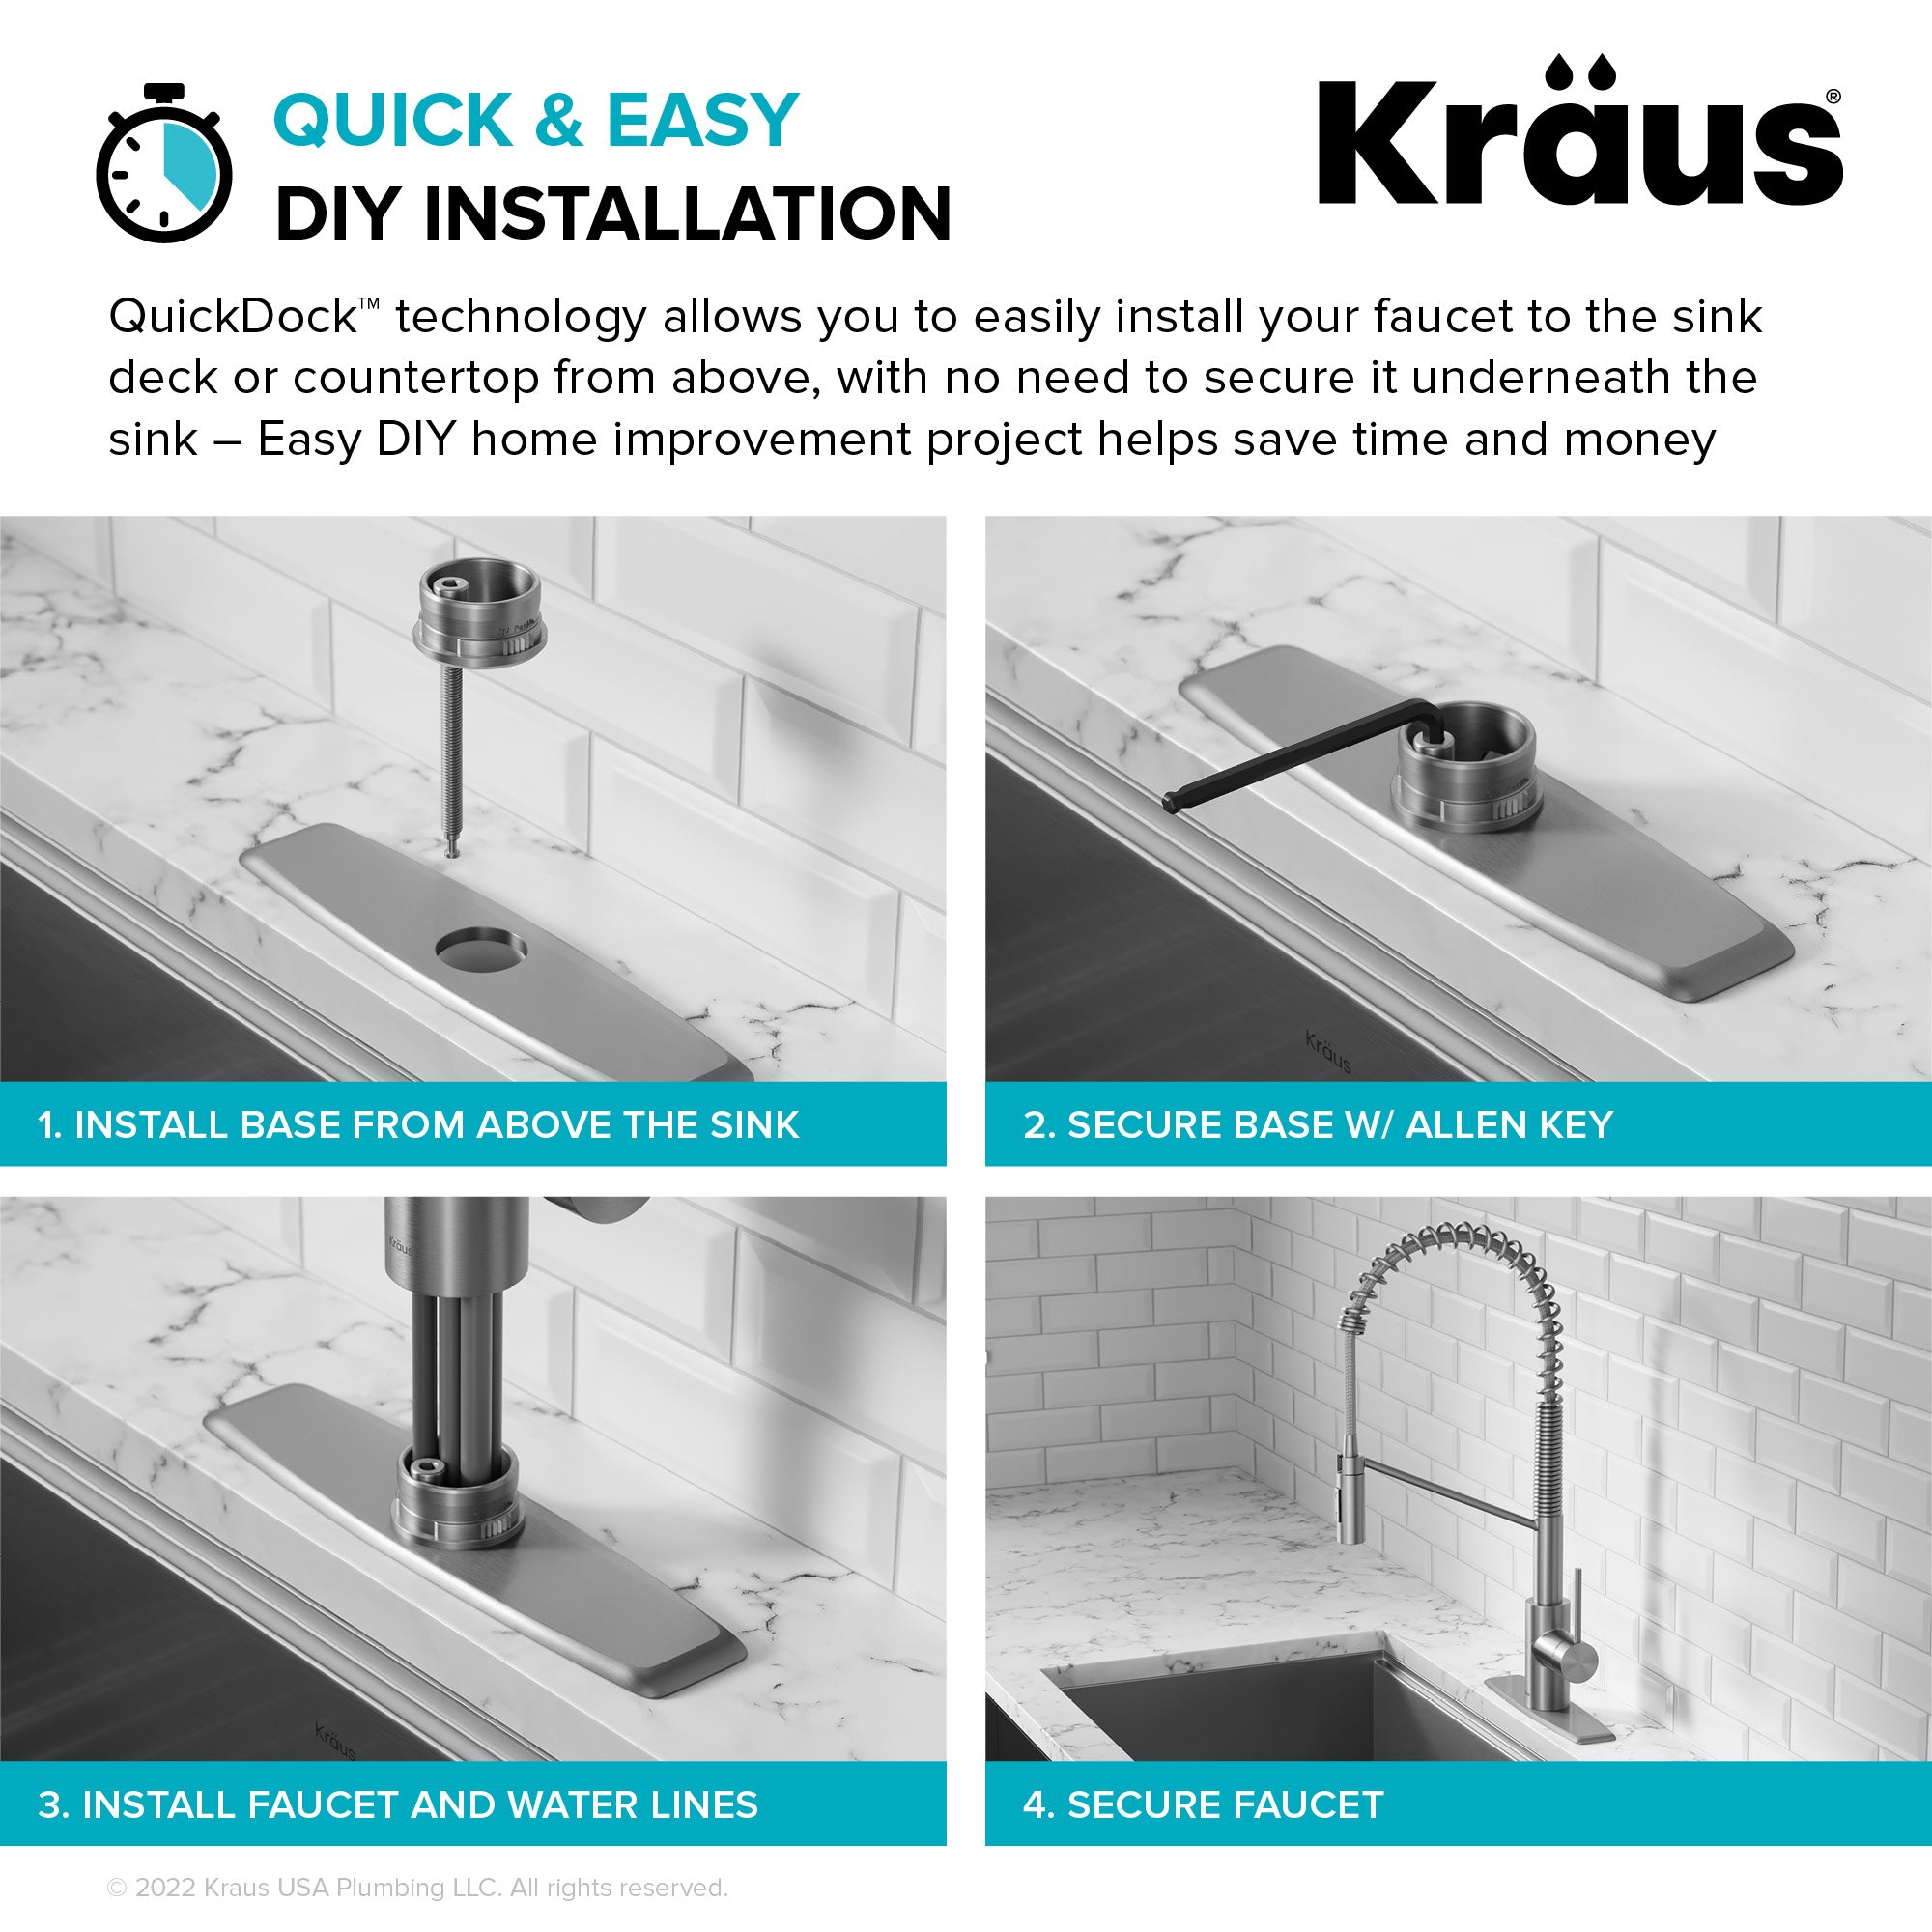 KRAUS Oletto Touchless Pull-Down Single Handle Faucet in Matte Black-Kitchen Faucets-DirectSinks